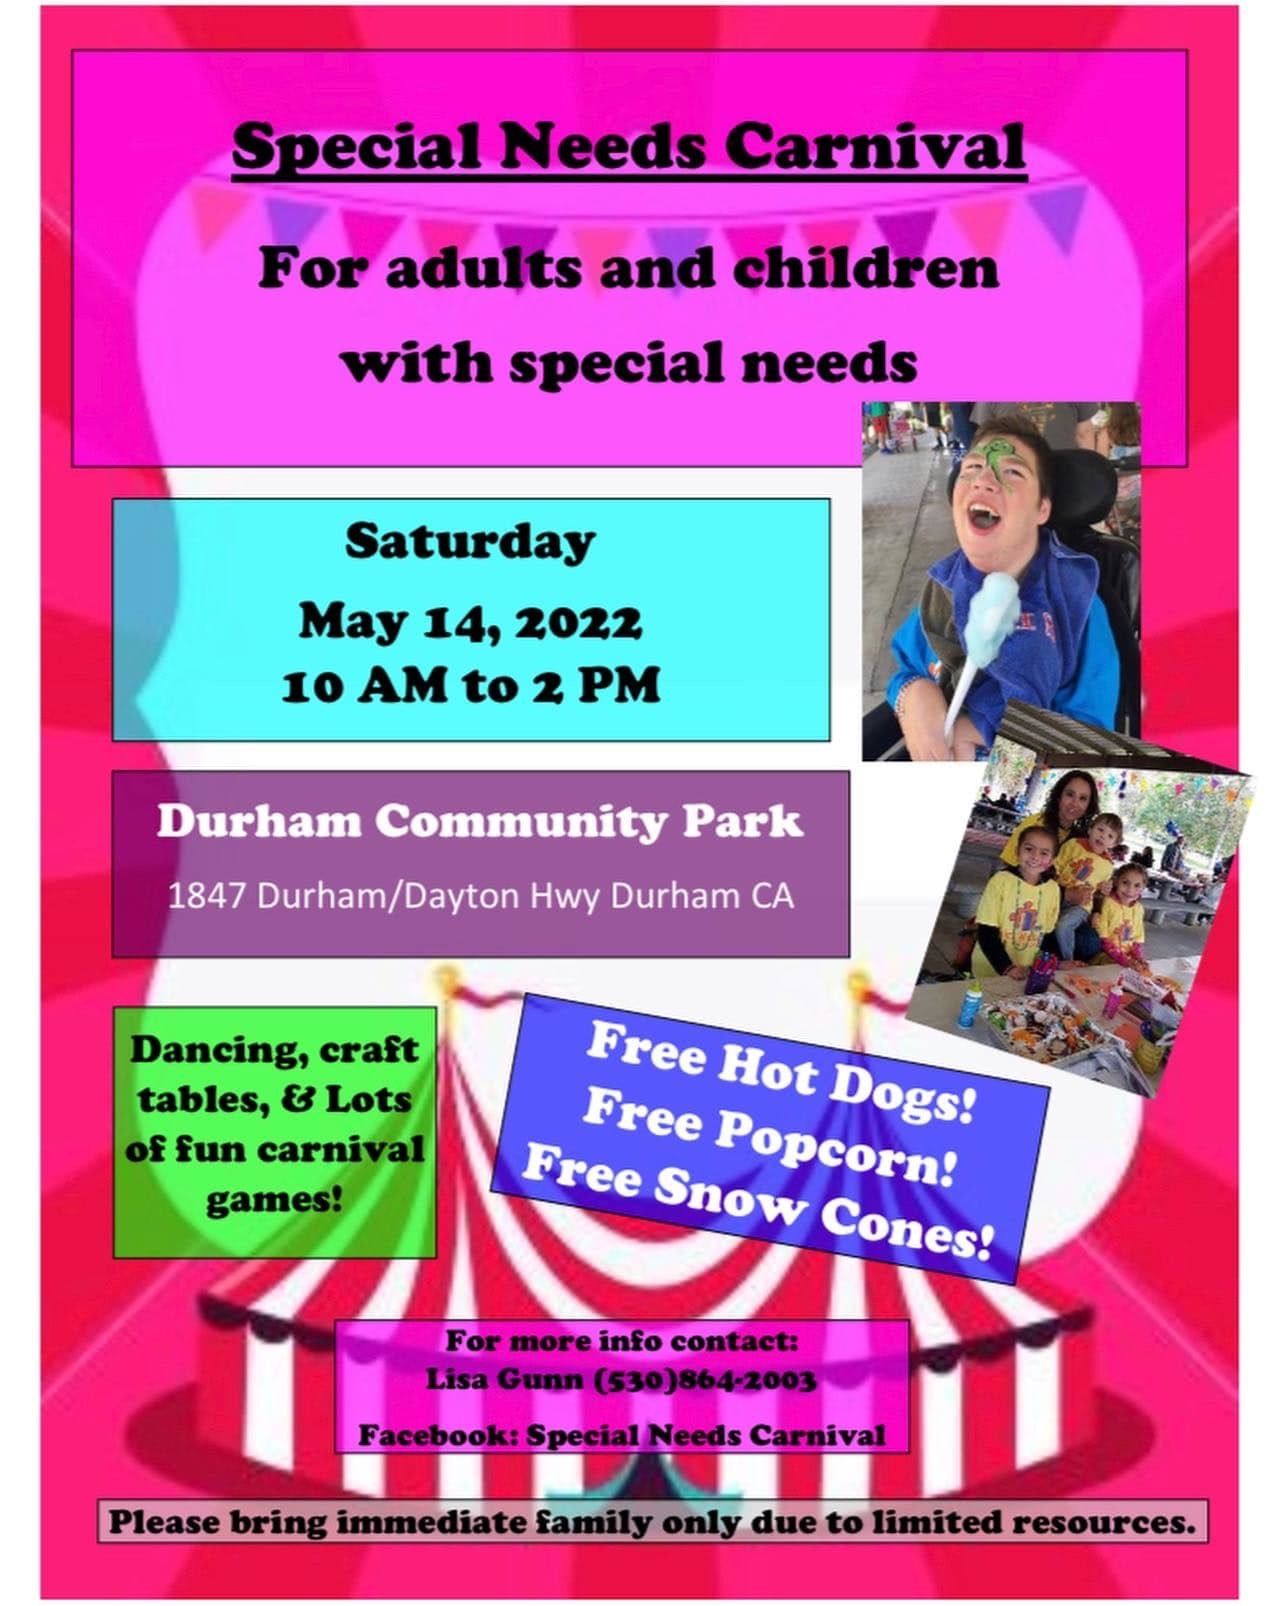 Special Needs Carnival in Durham, CA at Durham Park